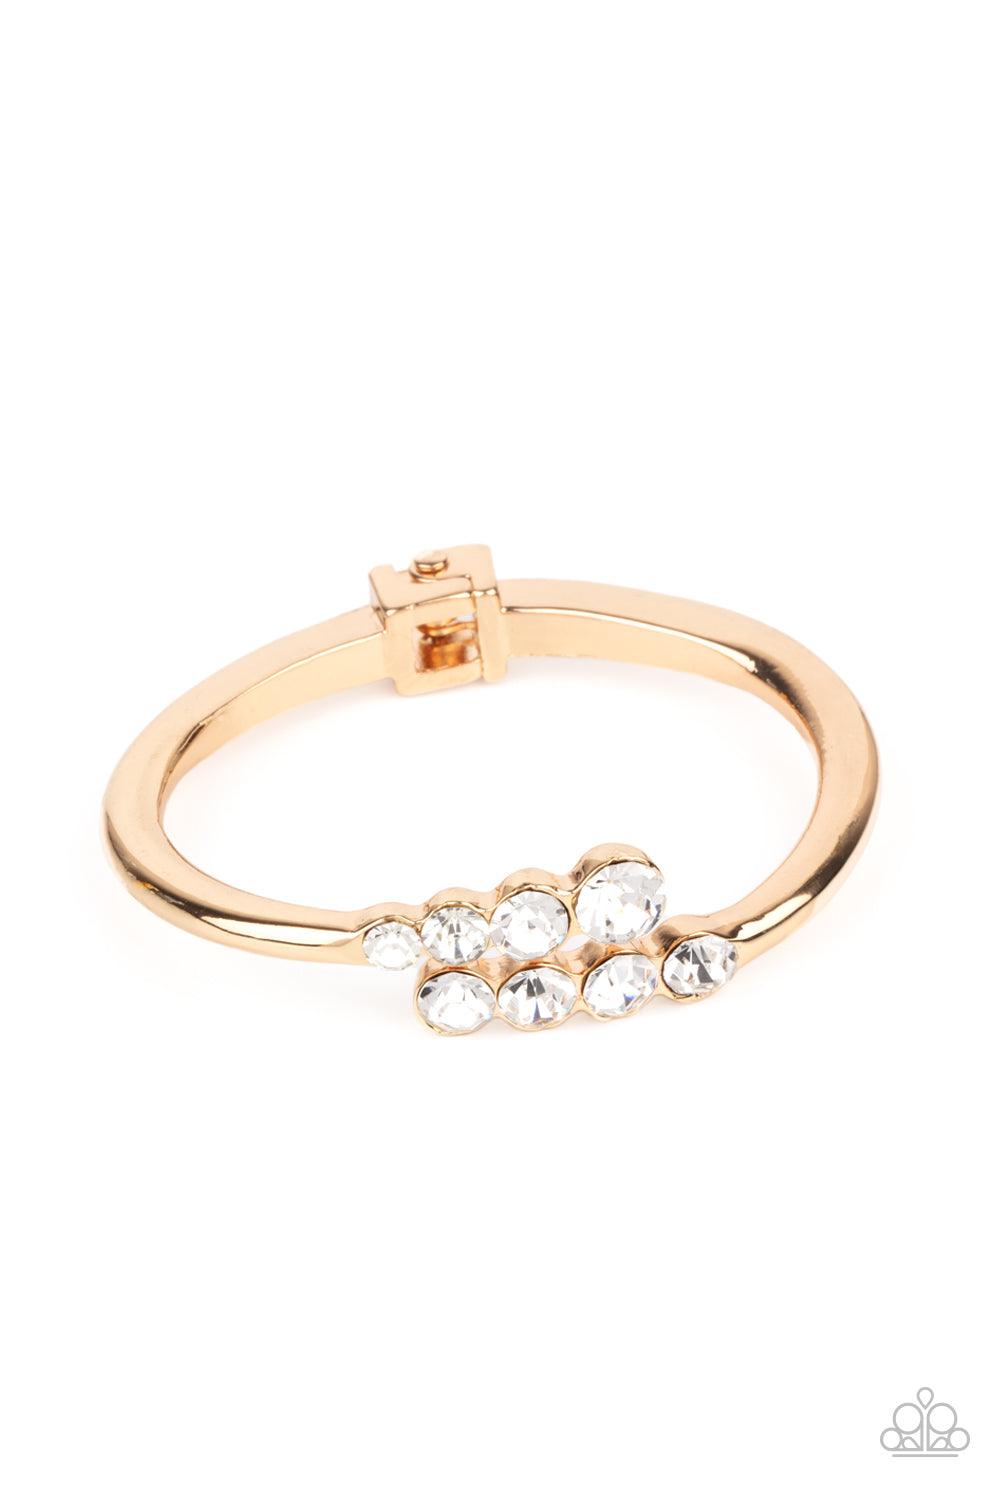 Paparazzi Accessories Defying Dazzle - Gold Attached to two substantial gold bars, oversized rows of glittery white rhinestones delicately stack into a hypnotizing centerpiece around the wrist. Features an adjustable hinge closure. Sold as one individual